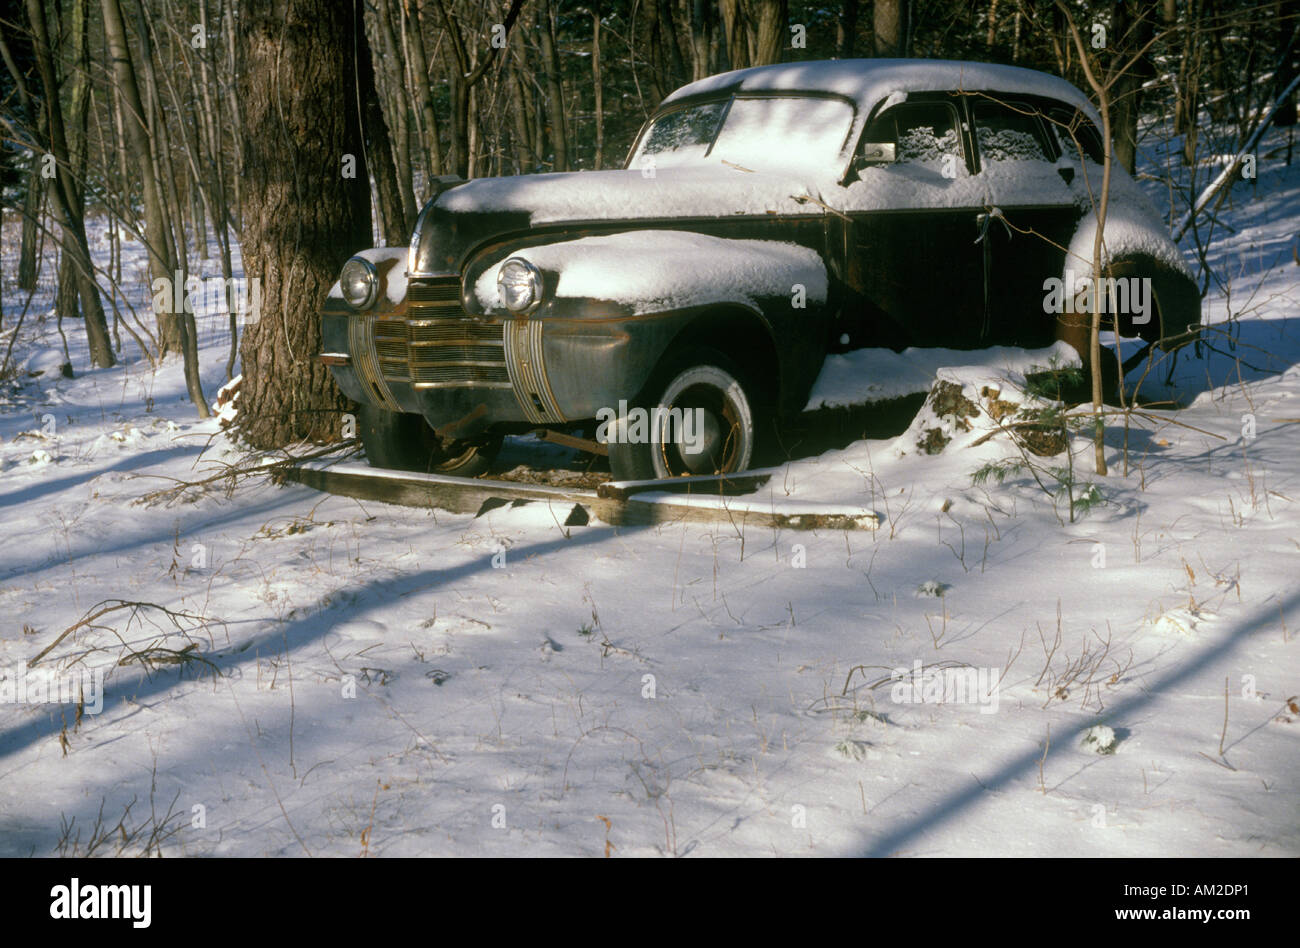 A junk car in Woodstock New York Stock Photo